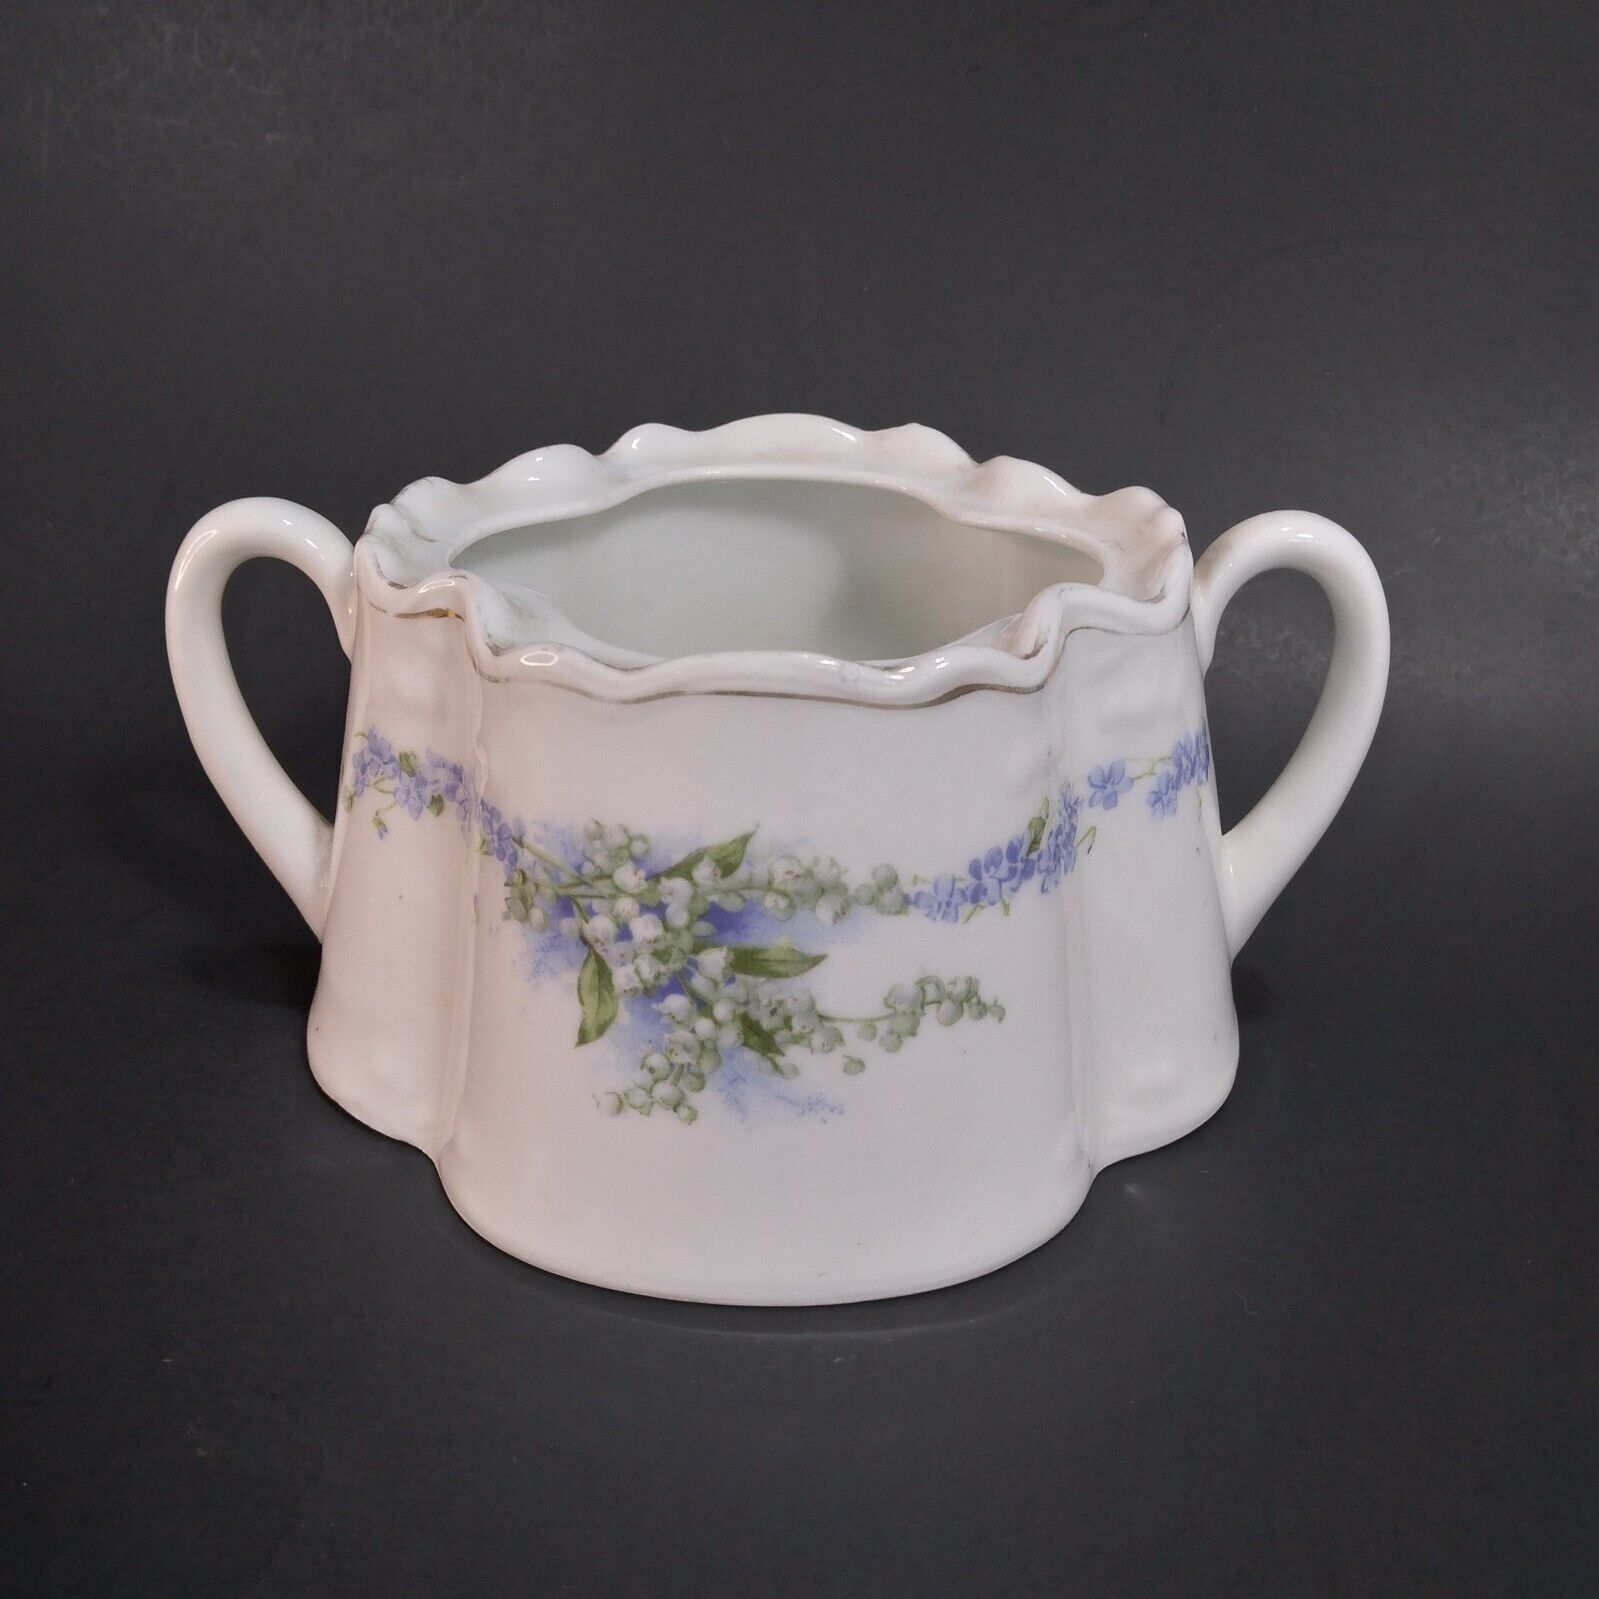 Vtg Antique 2 Handle Sugar Bowl Forget Me Not Bluebell Floral - No Lid As is